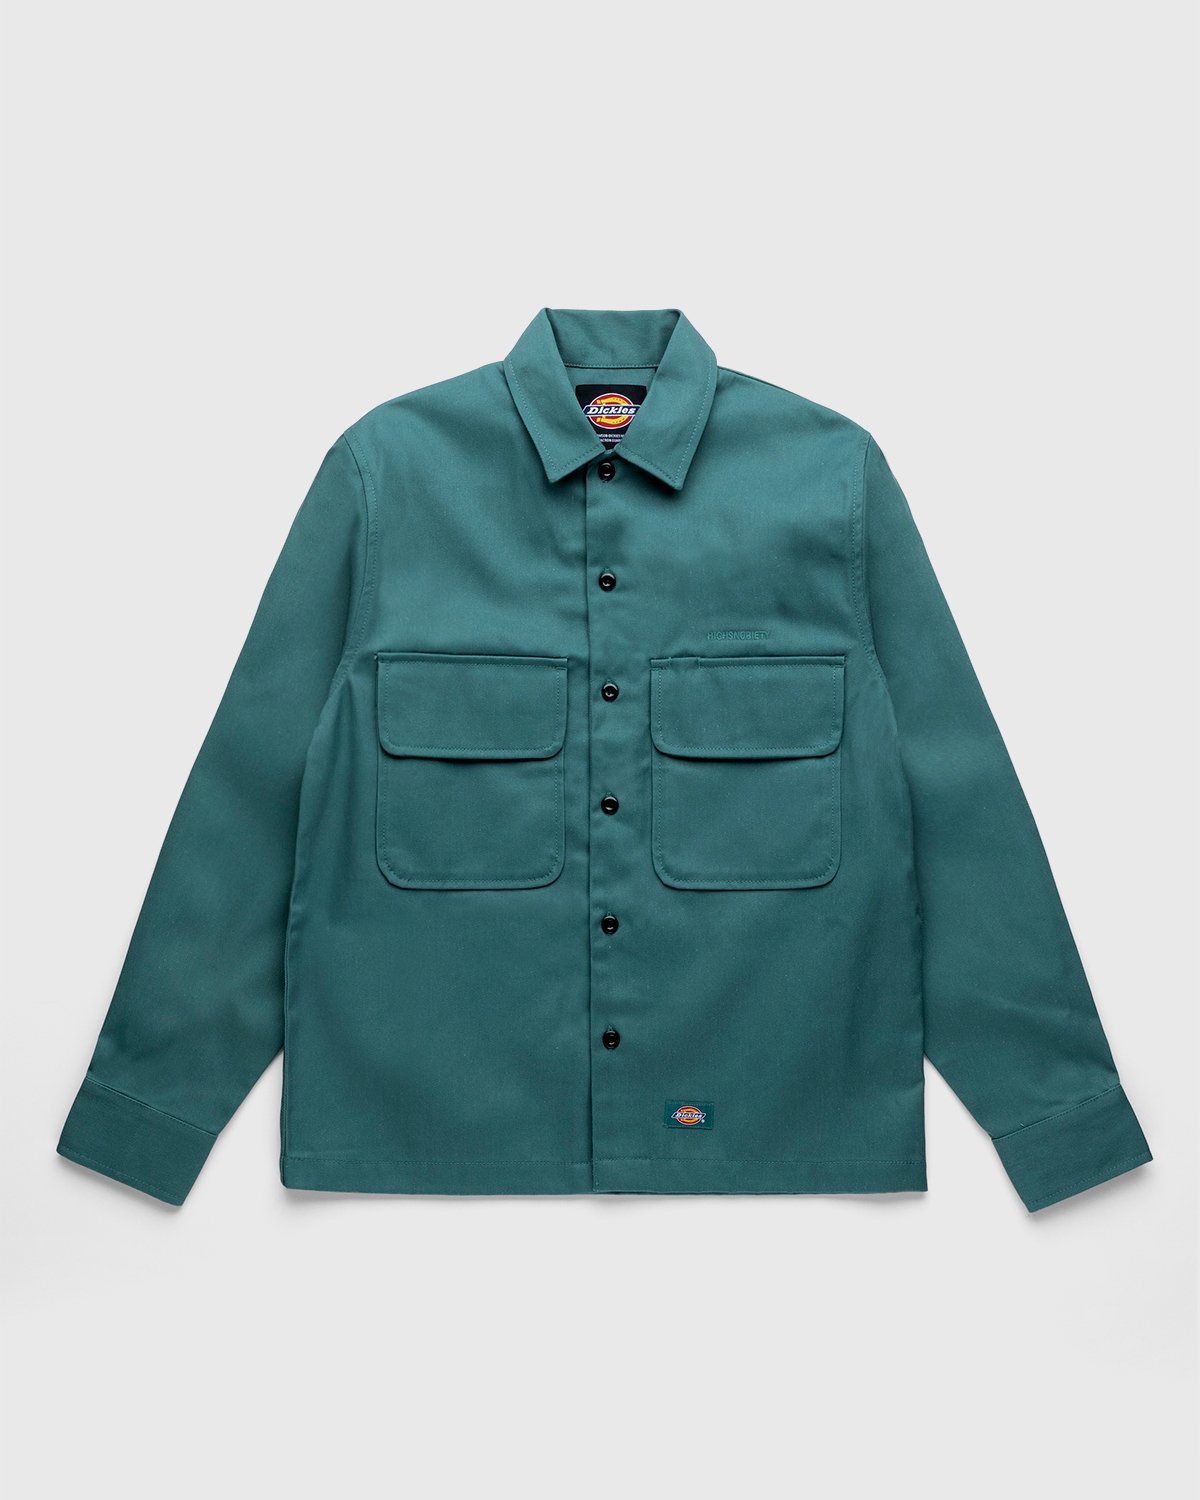 Highsnobiety x Dickies - Service Shirt Lincoln Green - Clothing - Green - Image 1